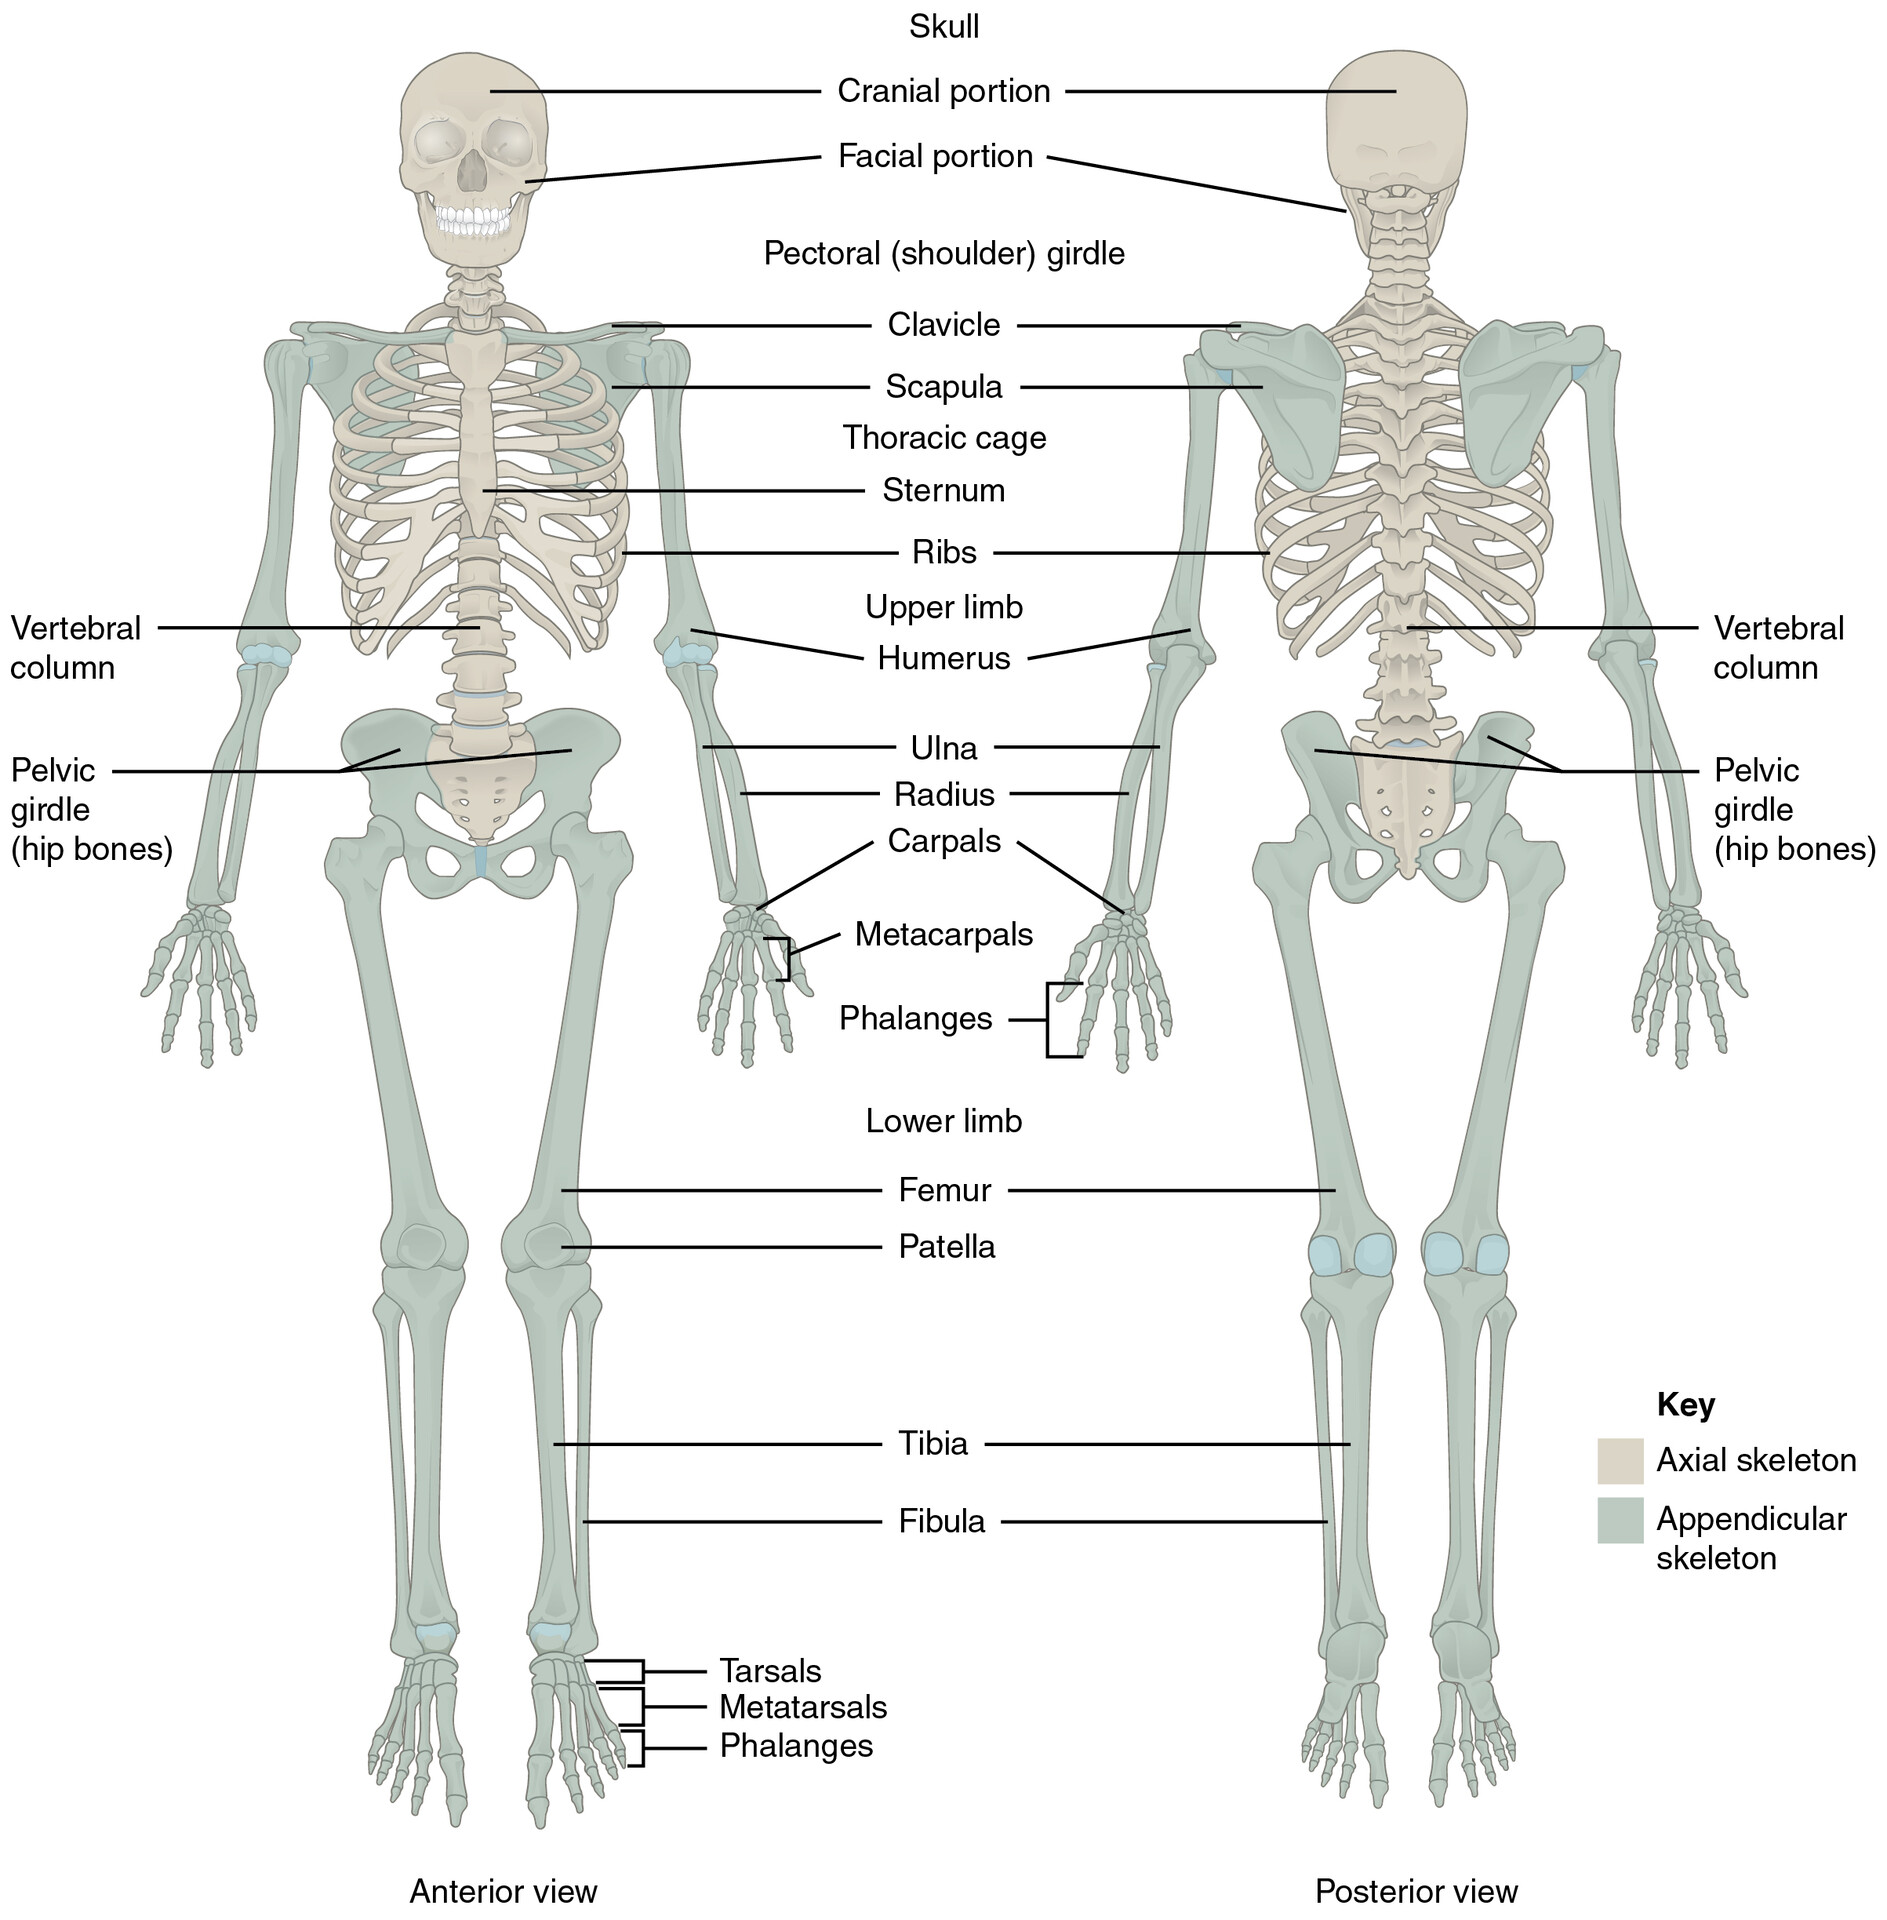 thoracic cage diagram labeled